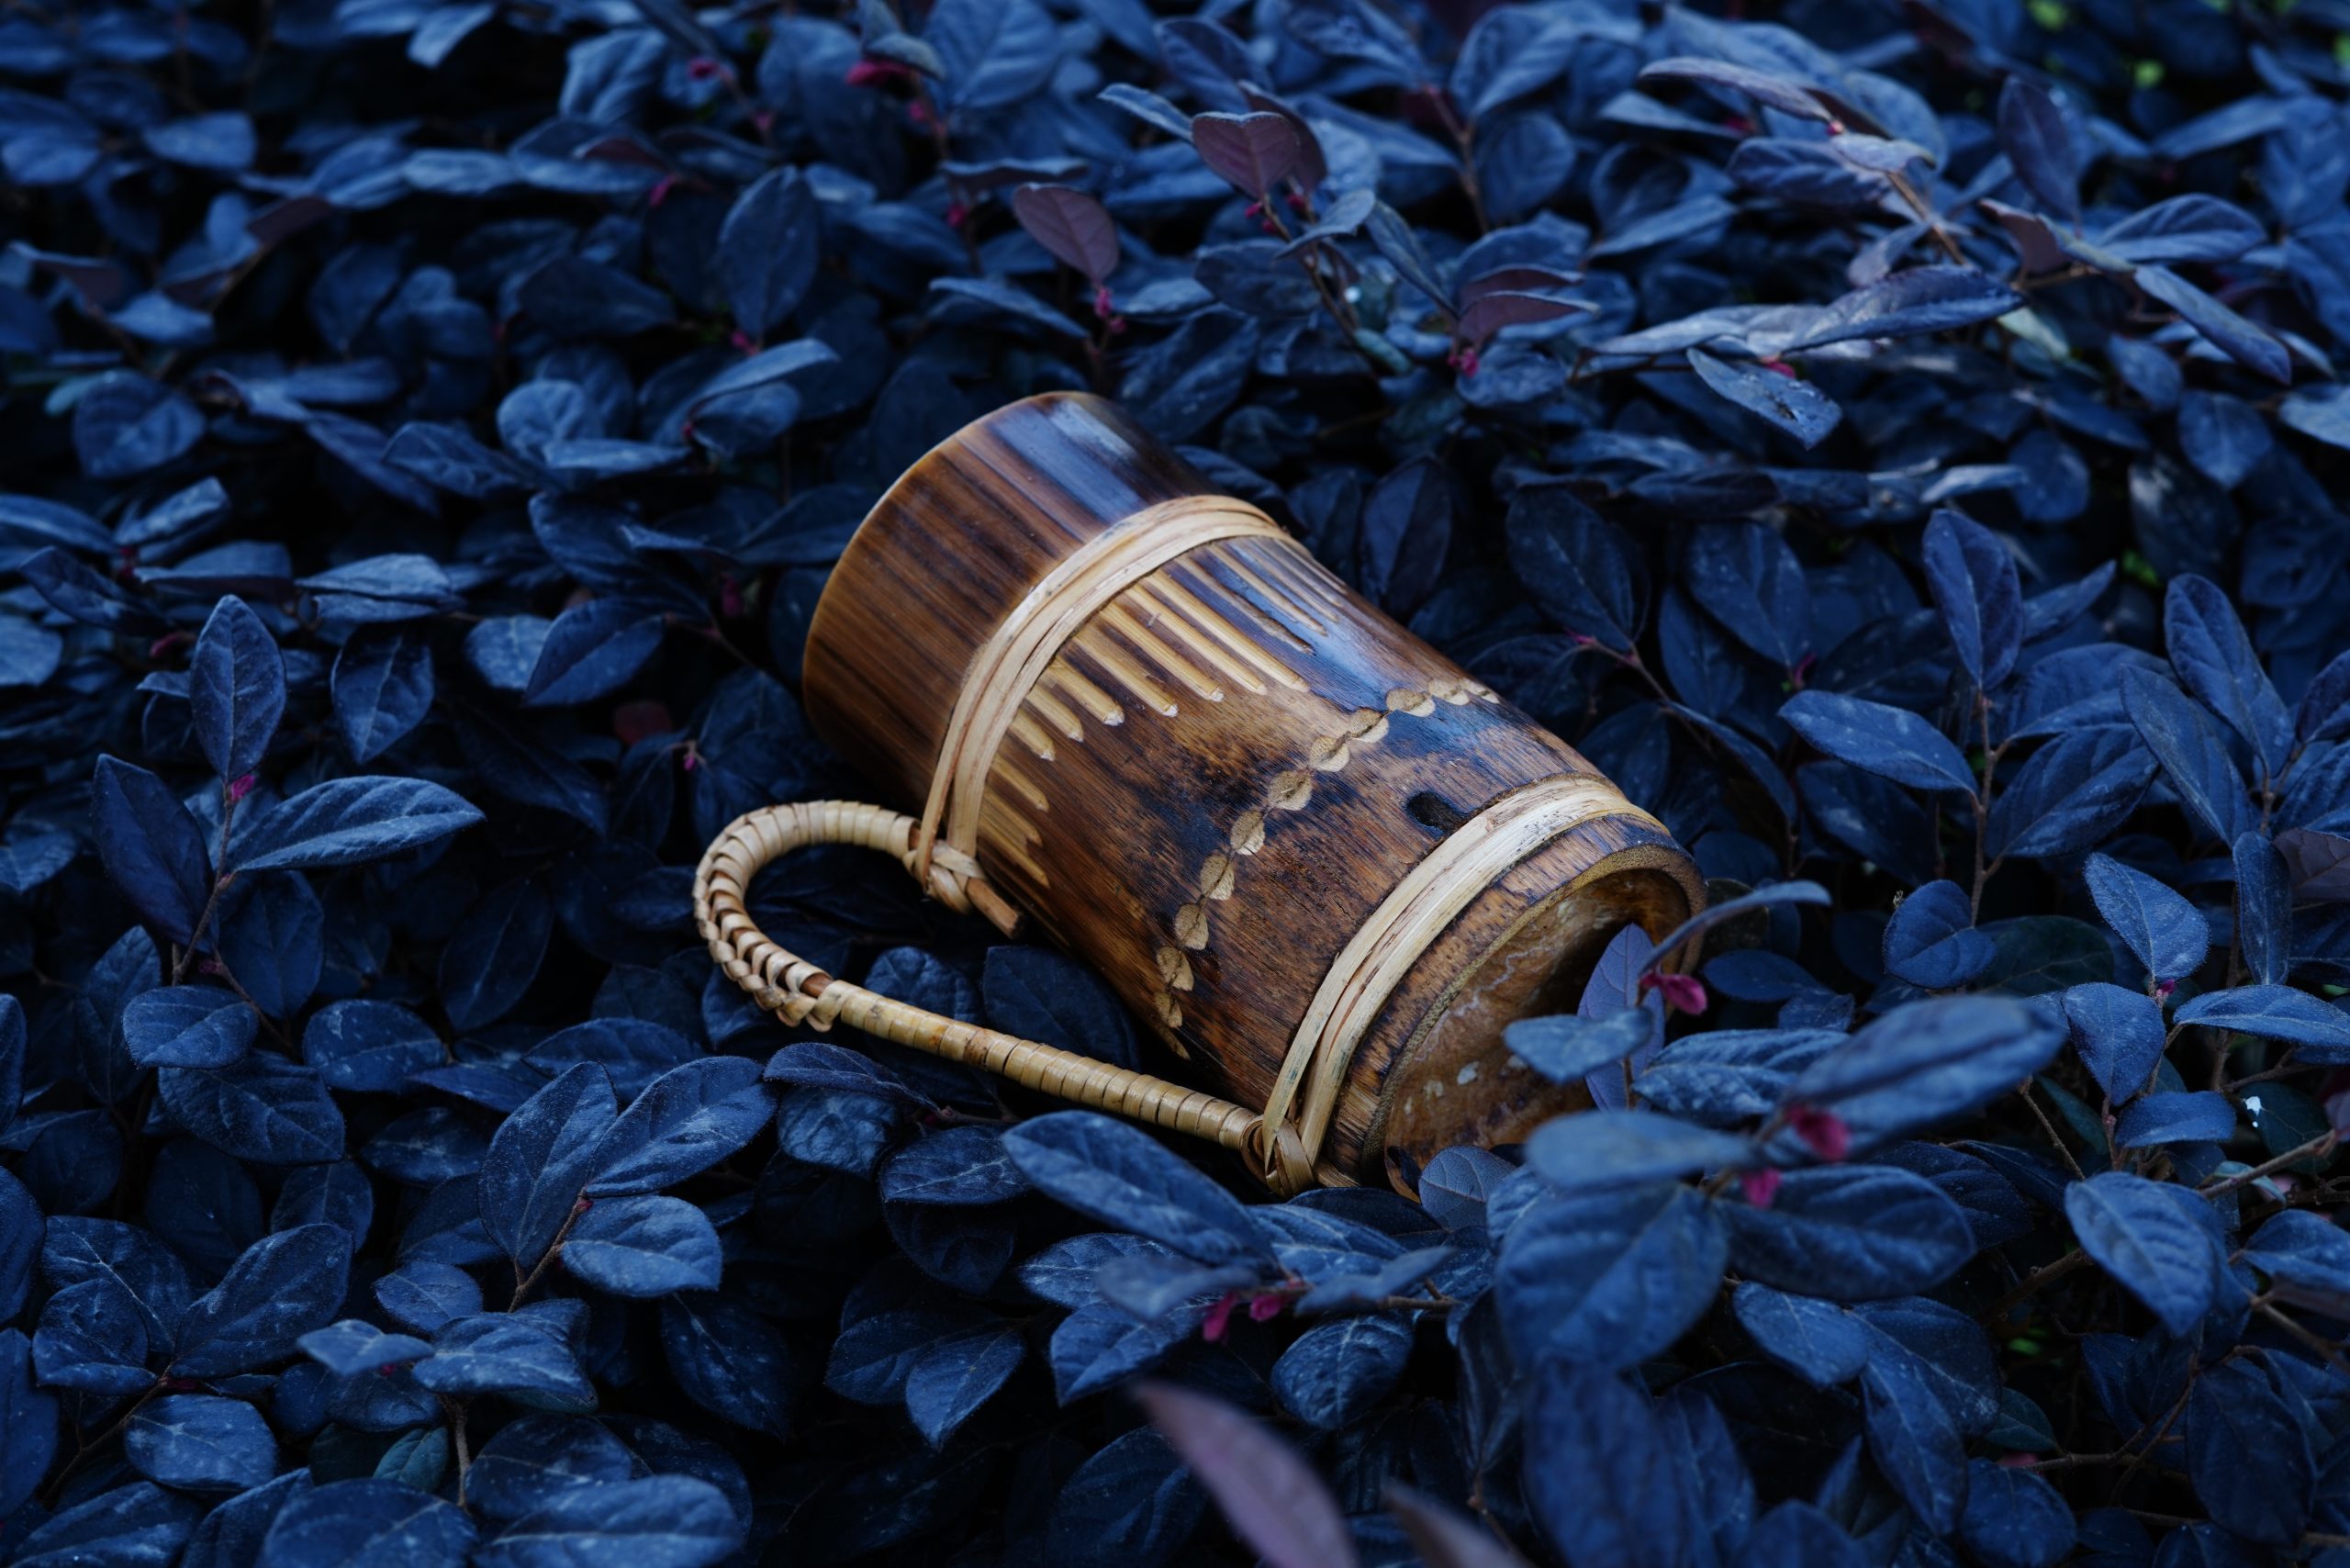 A wooden mug on a plant leaves